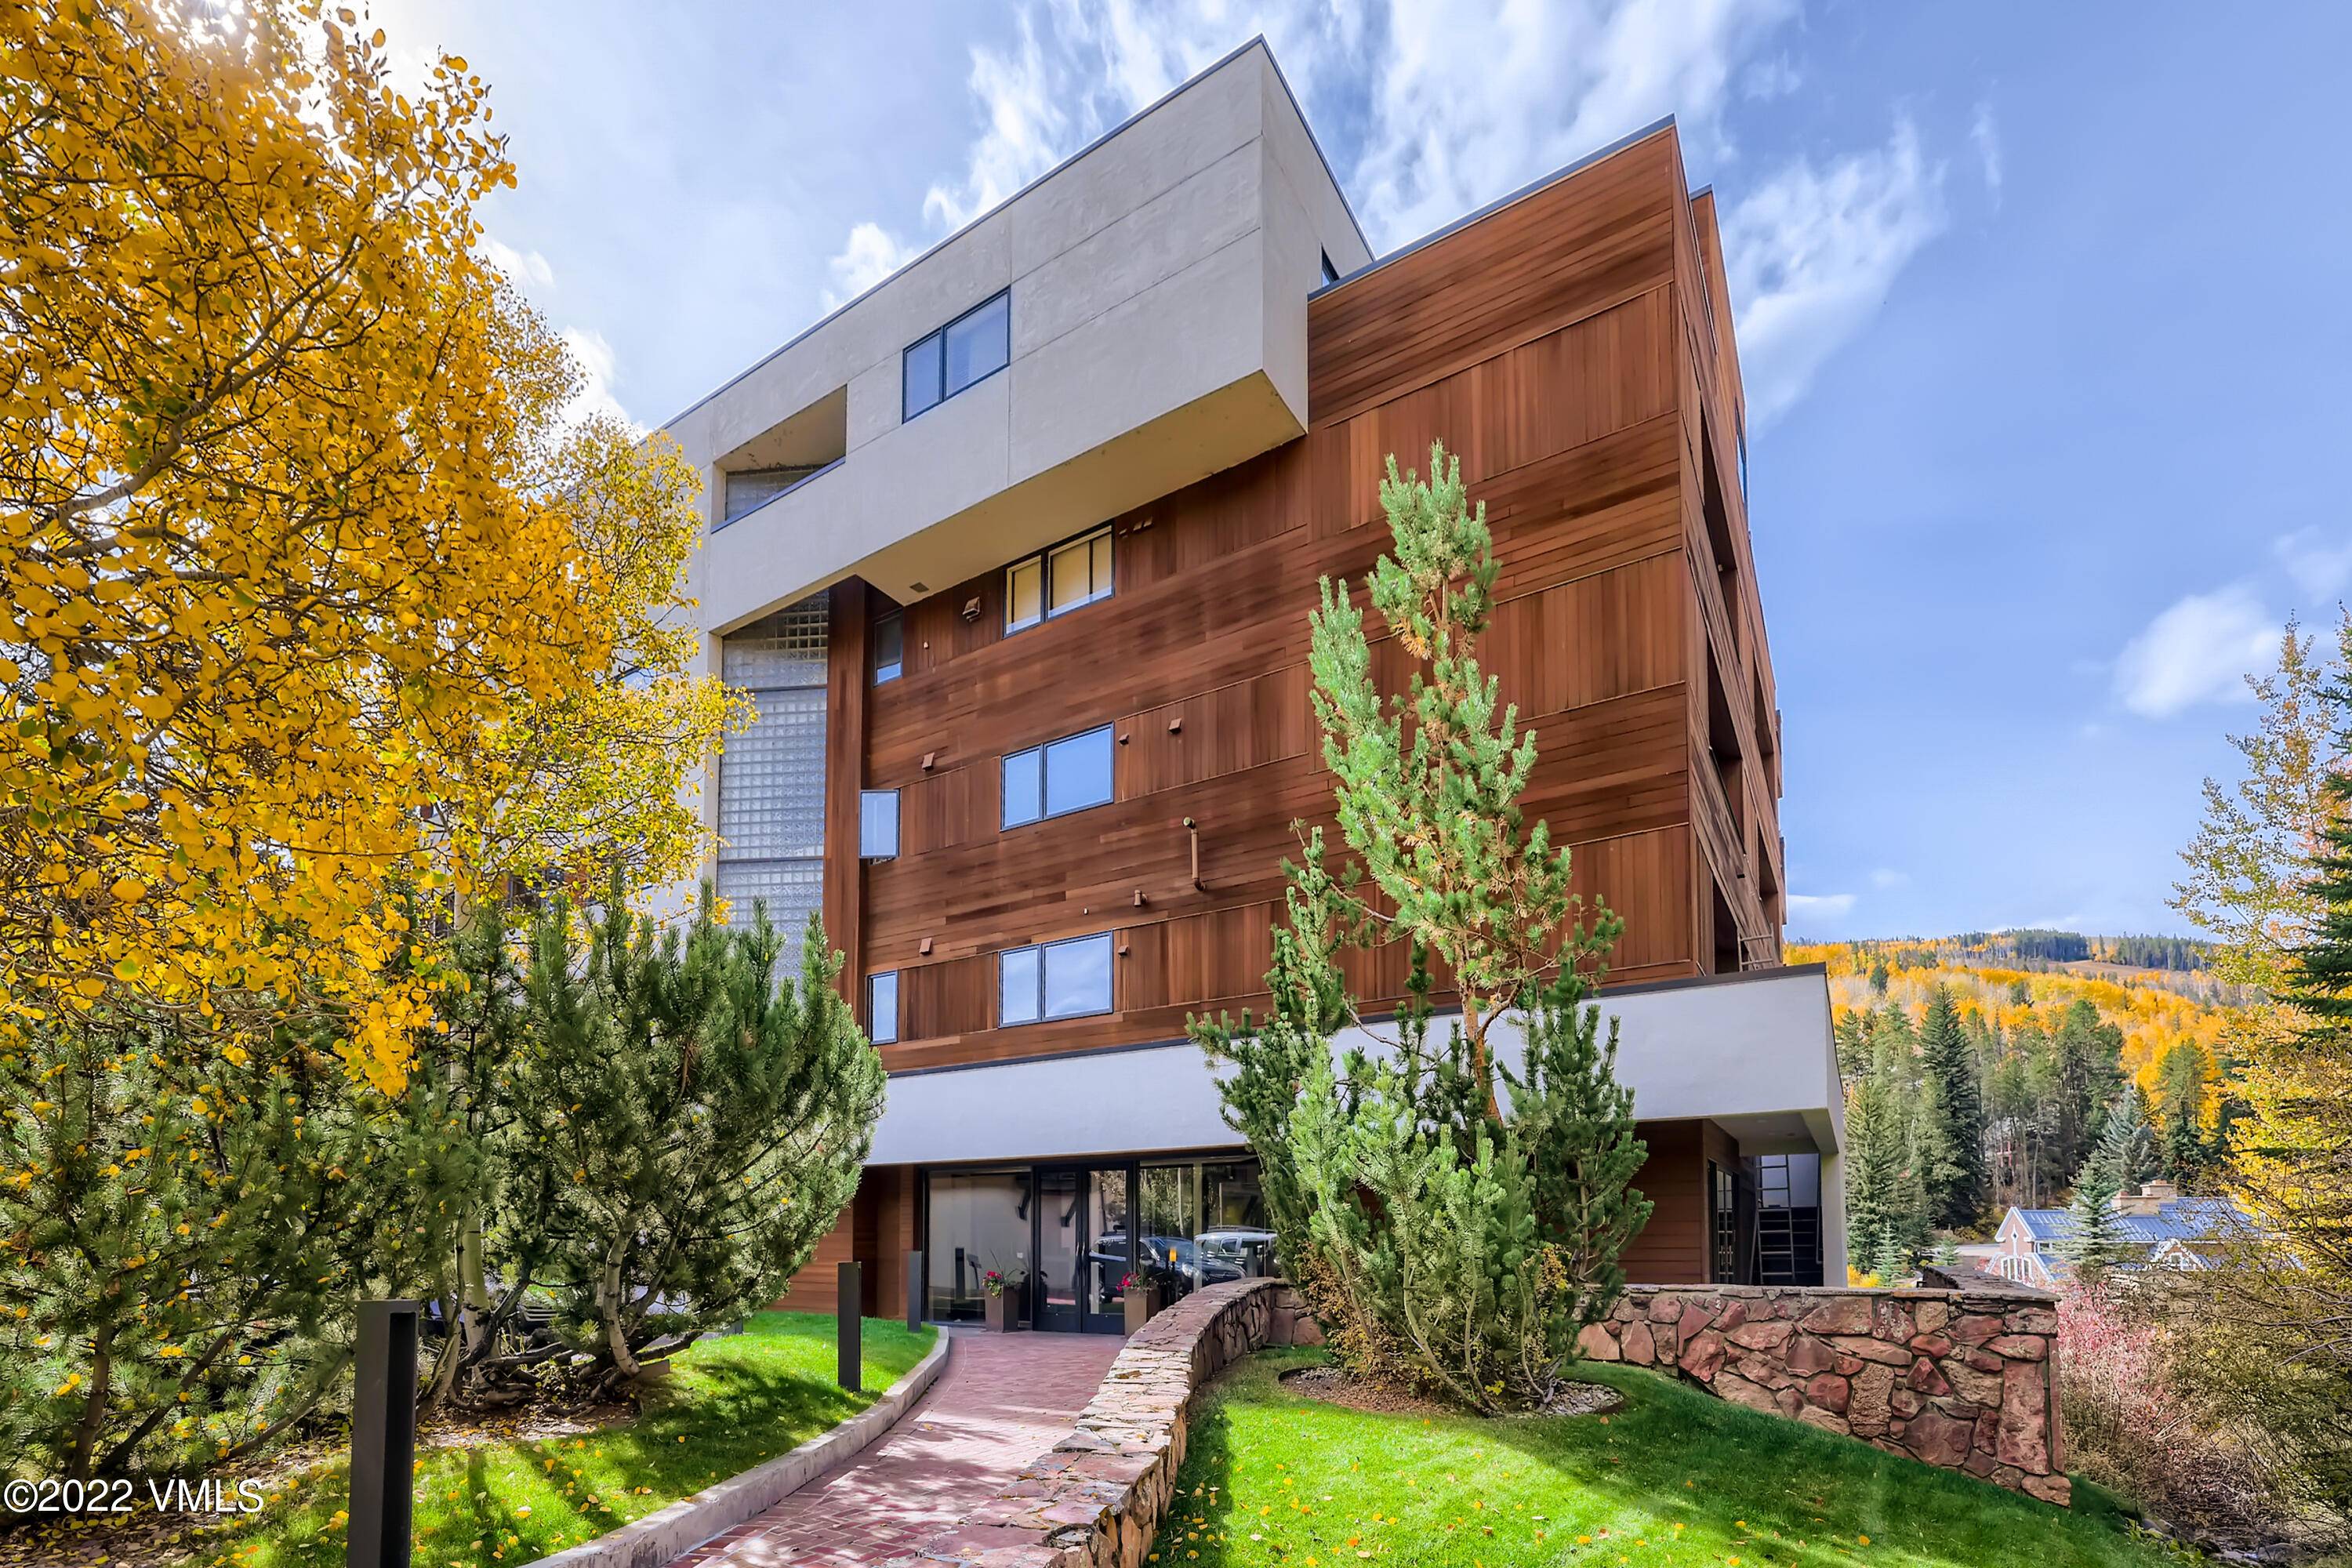 Located along Gore Creek with floor to ceiling windows facing Vail Mountain.